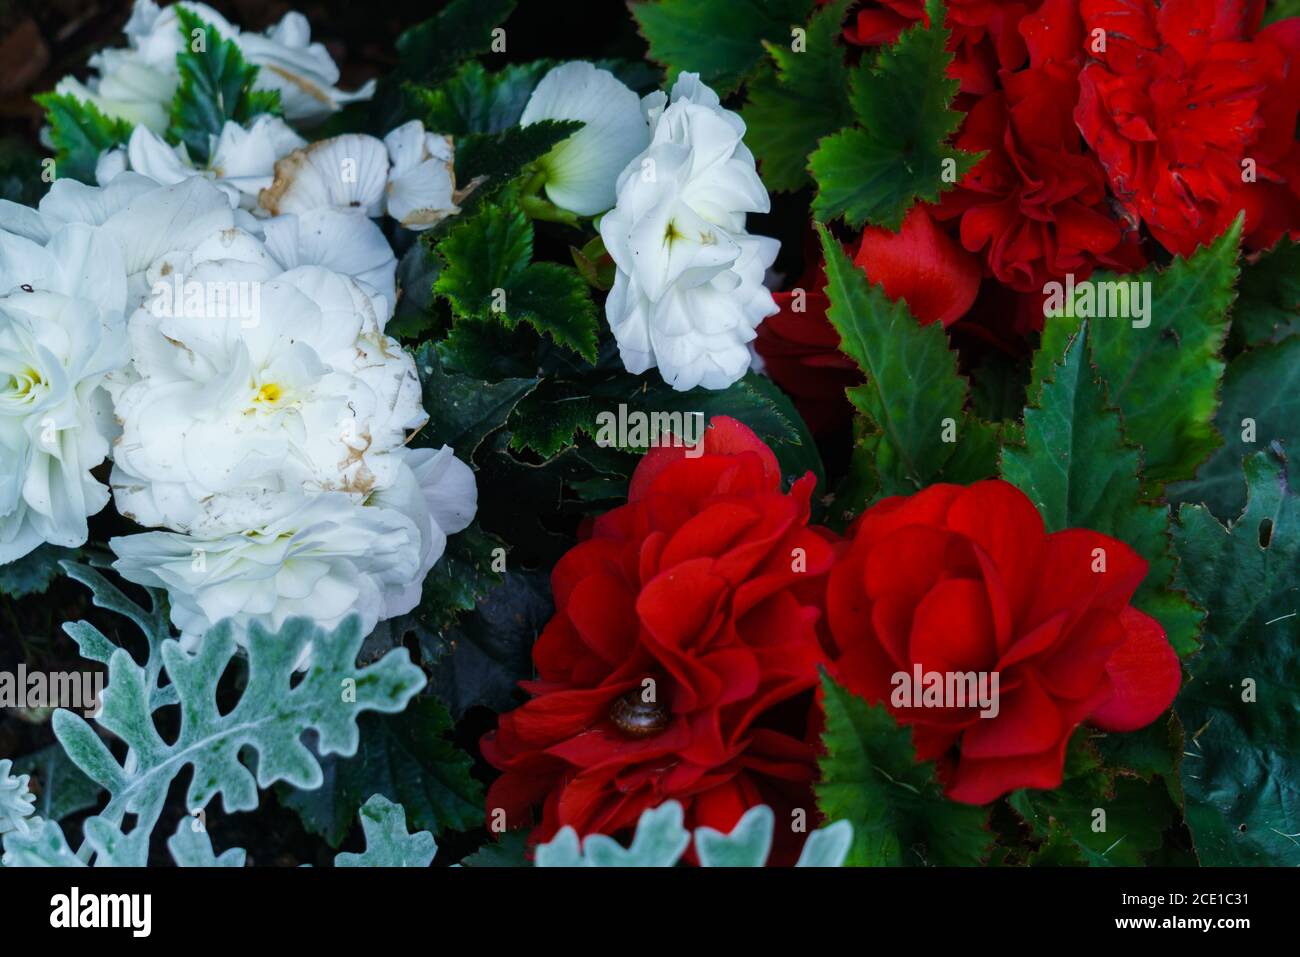 White and red begonia flowers among bright green leaves growing in a flower pot Stock Photo